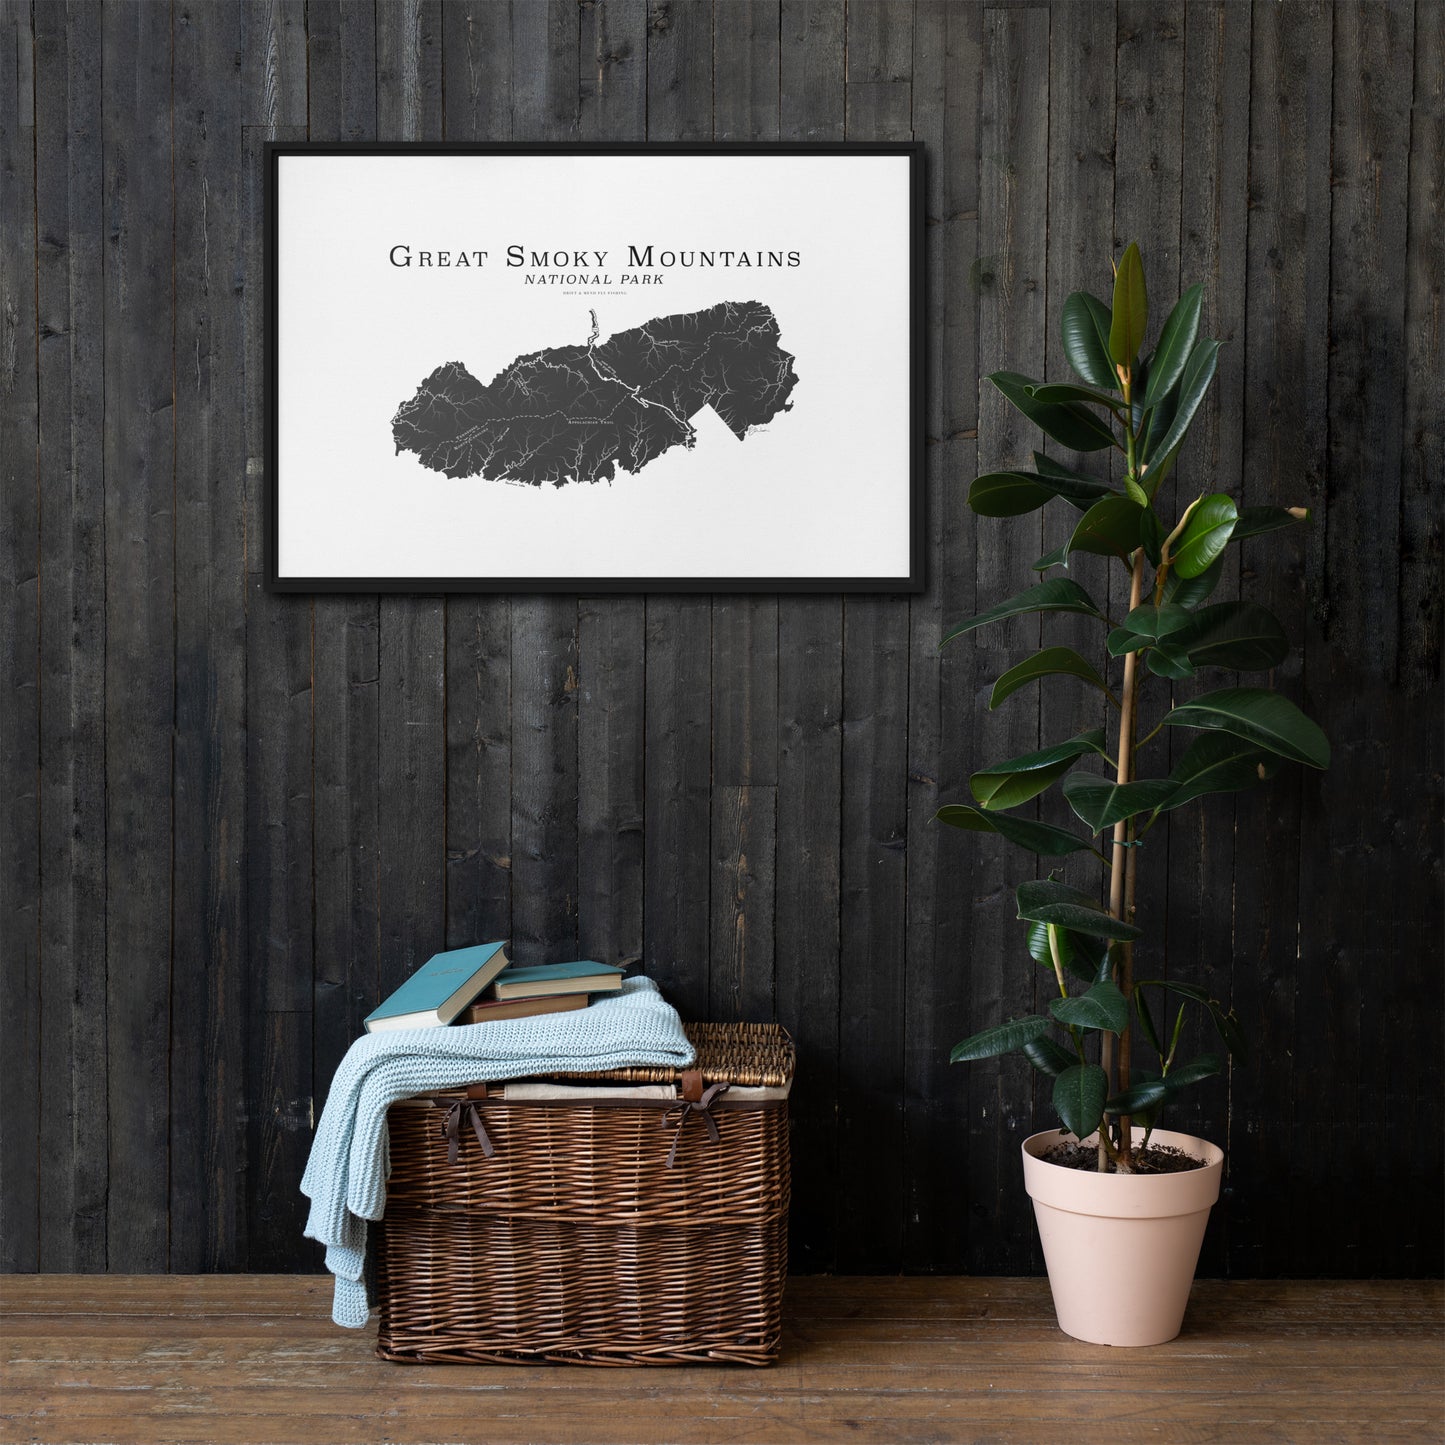 GREAT SMOKY MOUNTAINS NATIONAL PARK FRAMED CANVAS